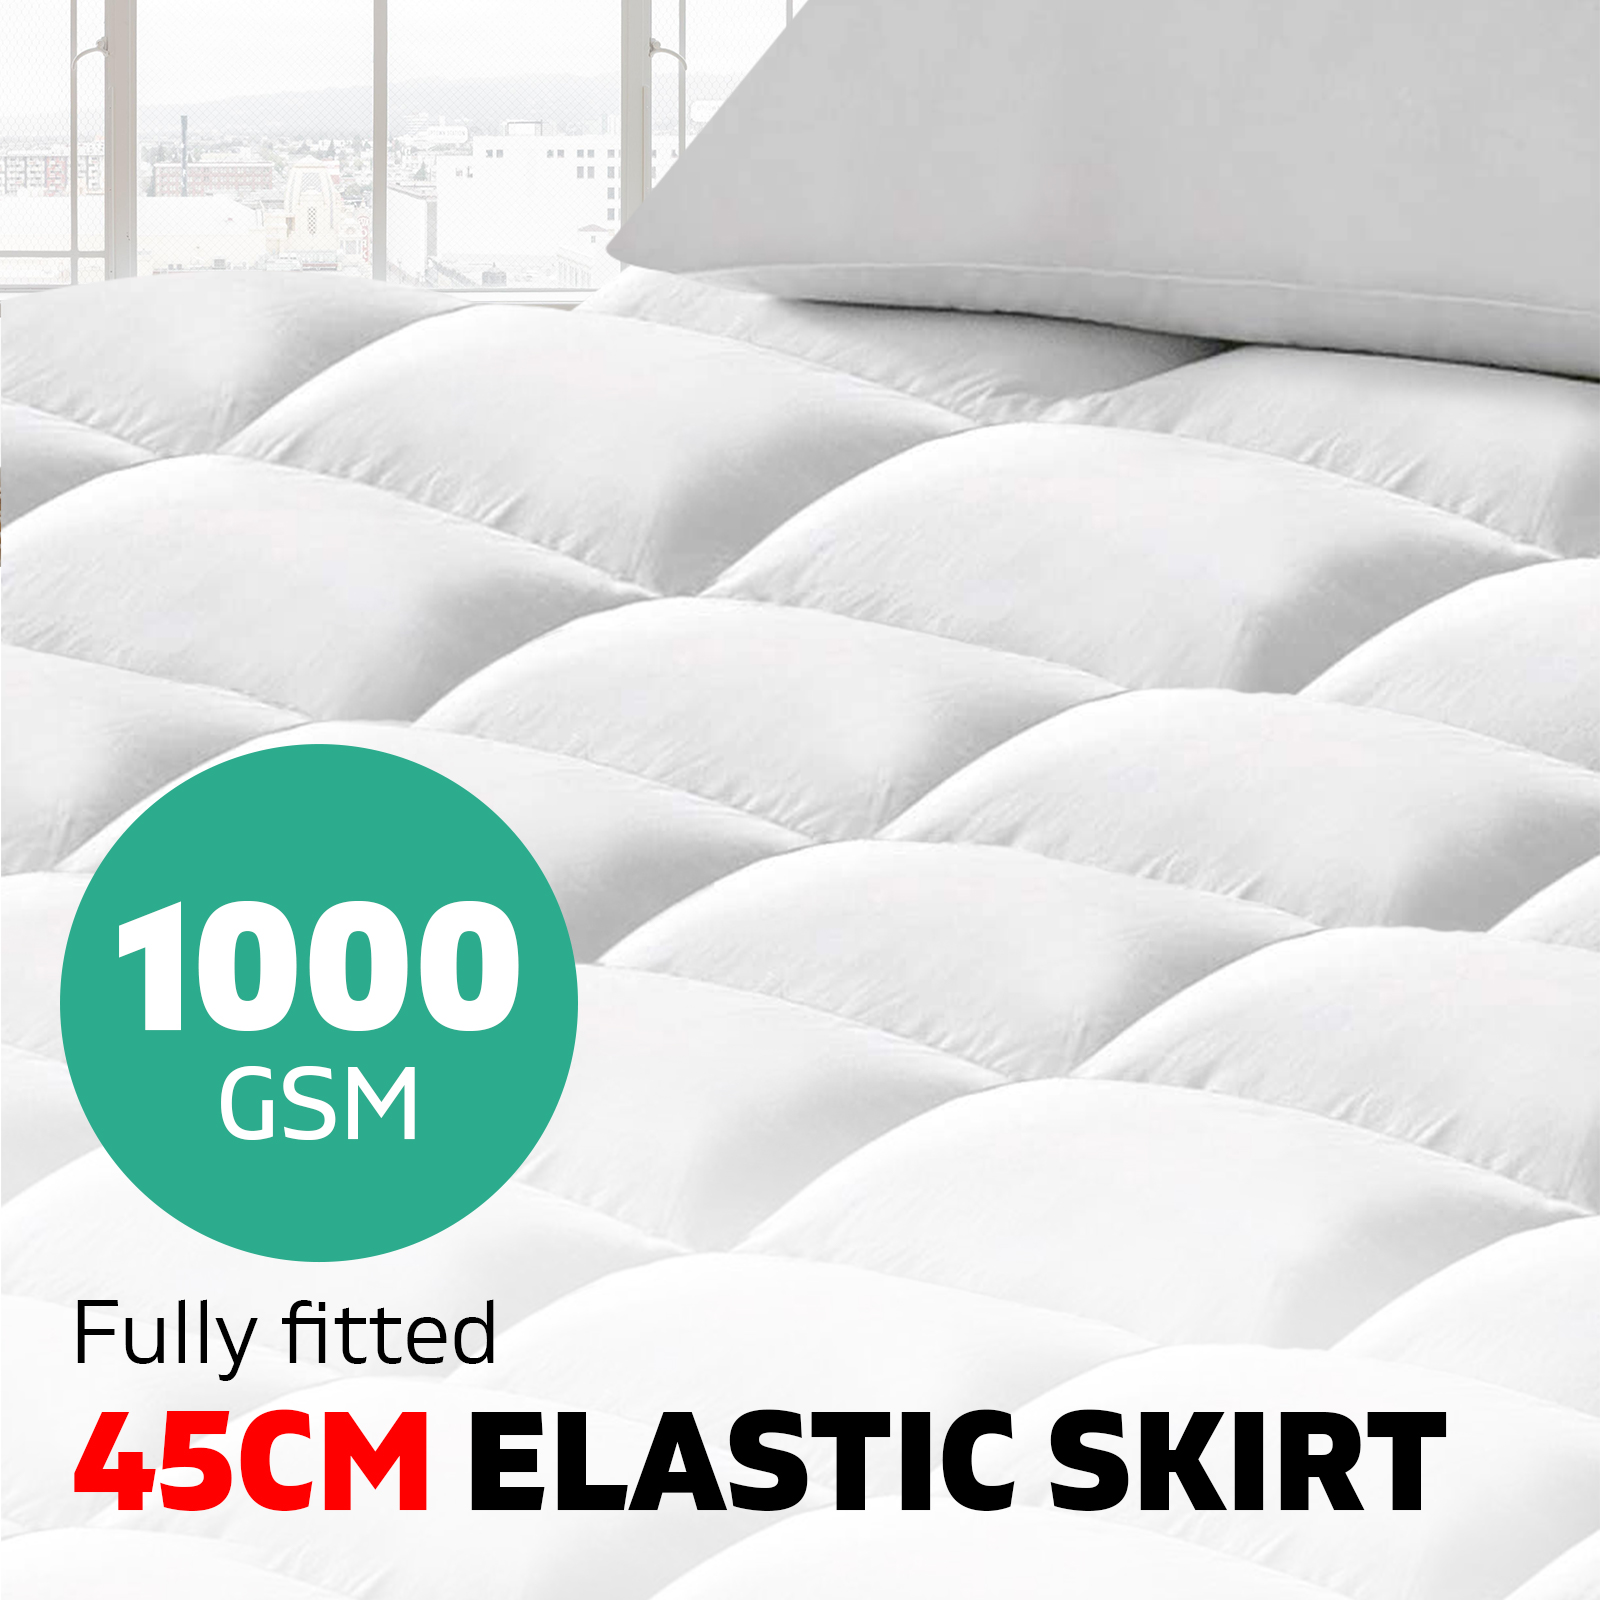 King Mattress Bed Topper Bamboo Fibre Pillowtop Protector Soft 5cm Thick